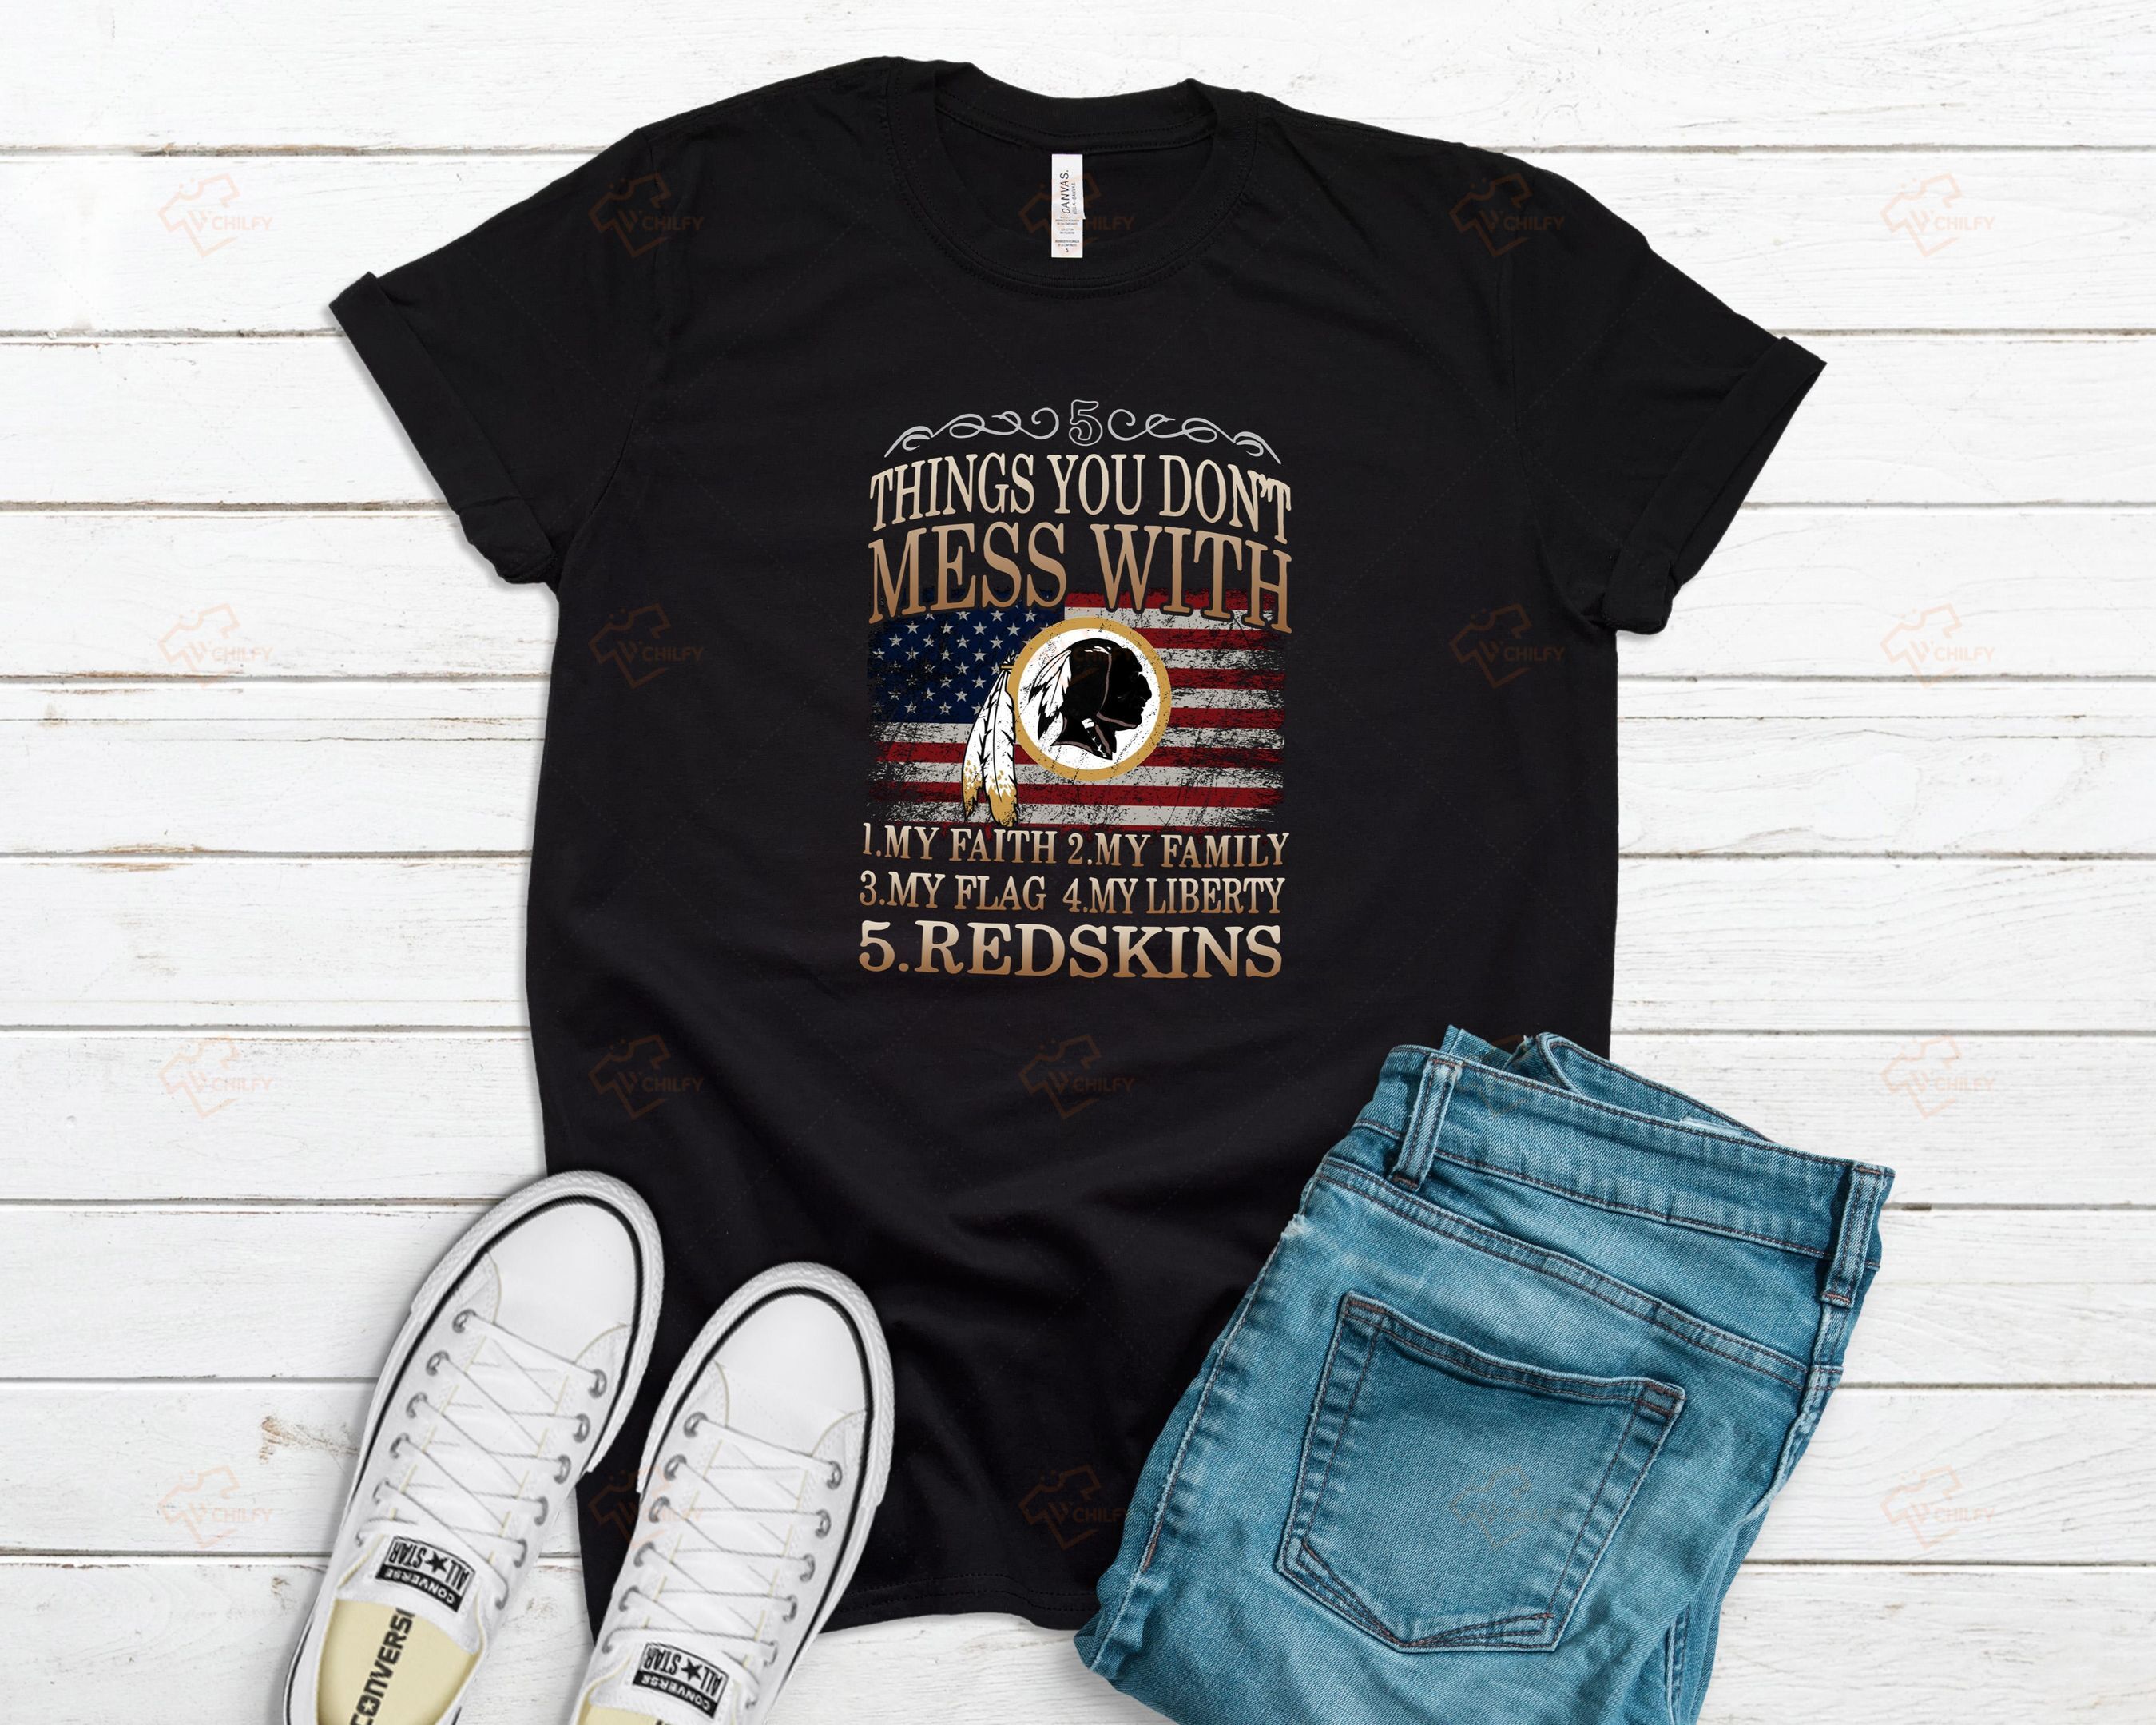 Thing you don’t mess with shirt,  Redskin shirt, badass Native t shirt, Native American shirt, gift for Indigenous people